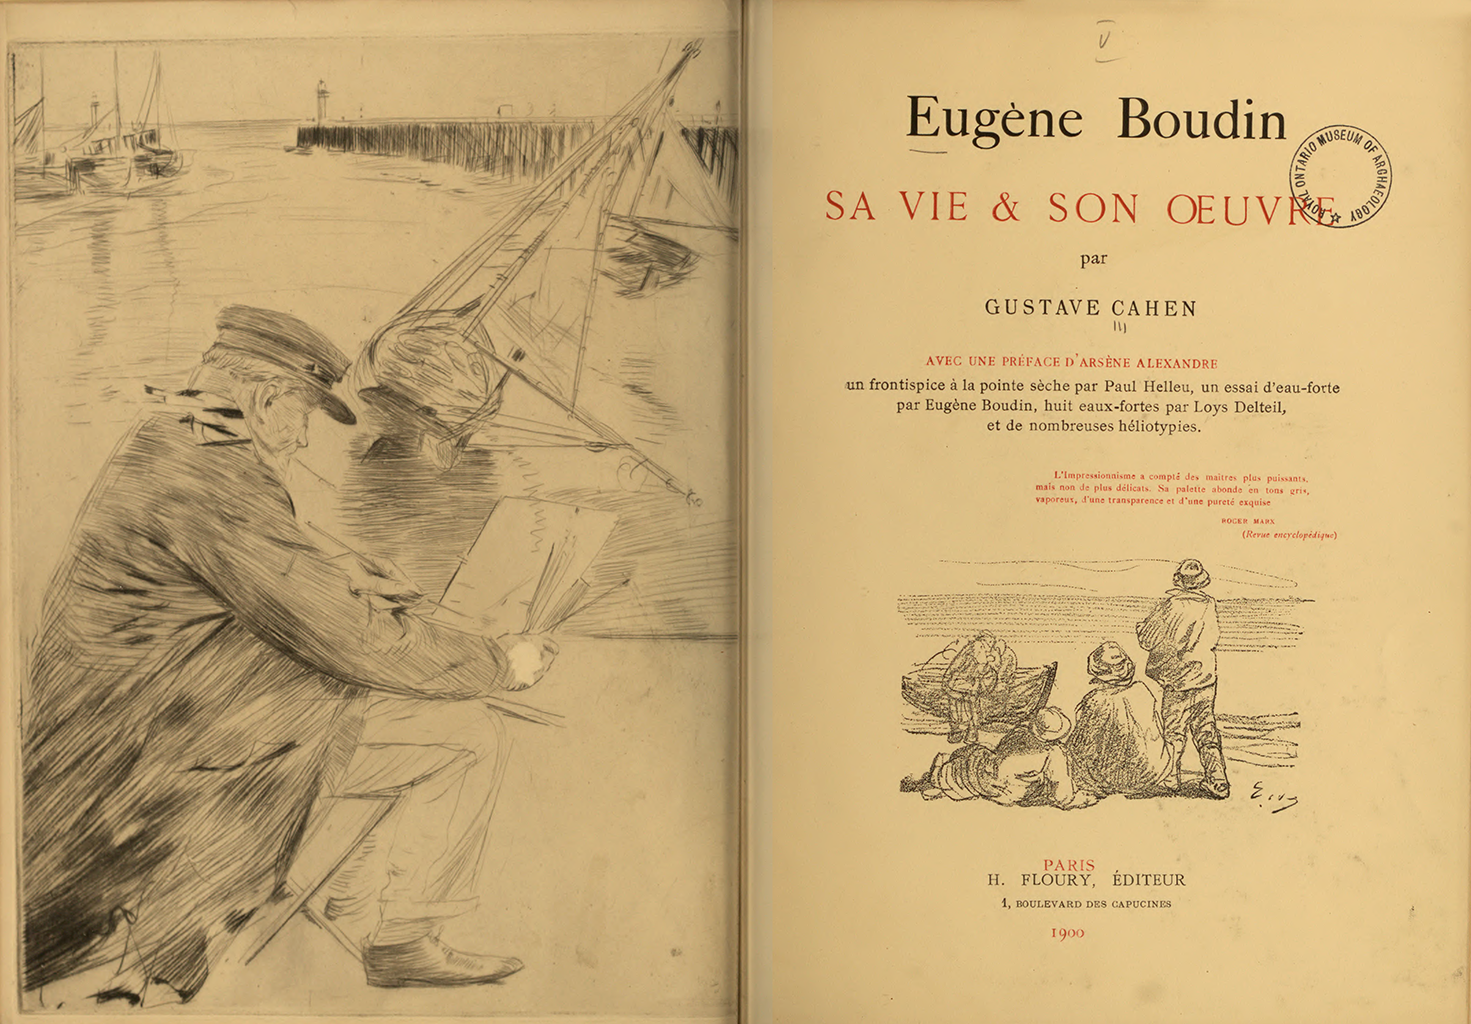 A photograph depicting two pages from a book. On the left page, there is a sketch depicting a man wearing a coat and reading a newspaper. He sits near a river in which sailboats are resting on the bank. On the right page, it states, &ldquo;Eugene Boudin Sa VIE & SON OEUVRE&rdquo; Under it is an image of three men staring into the ocean.